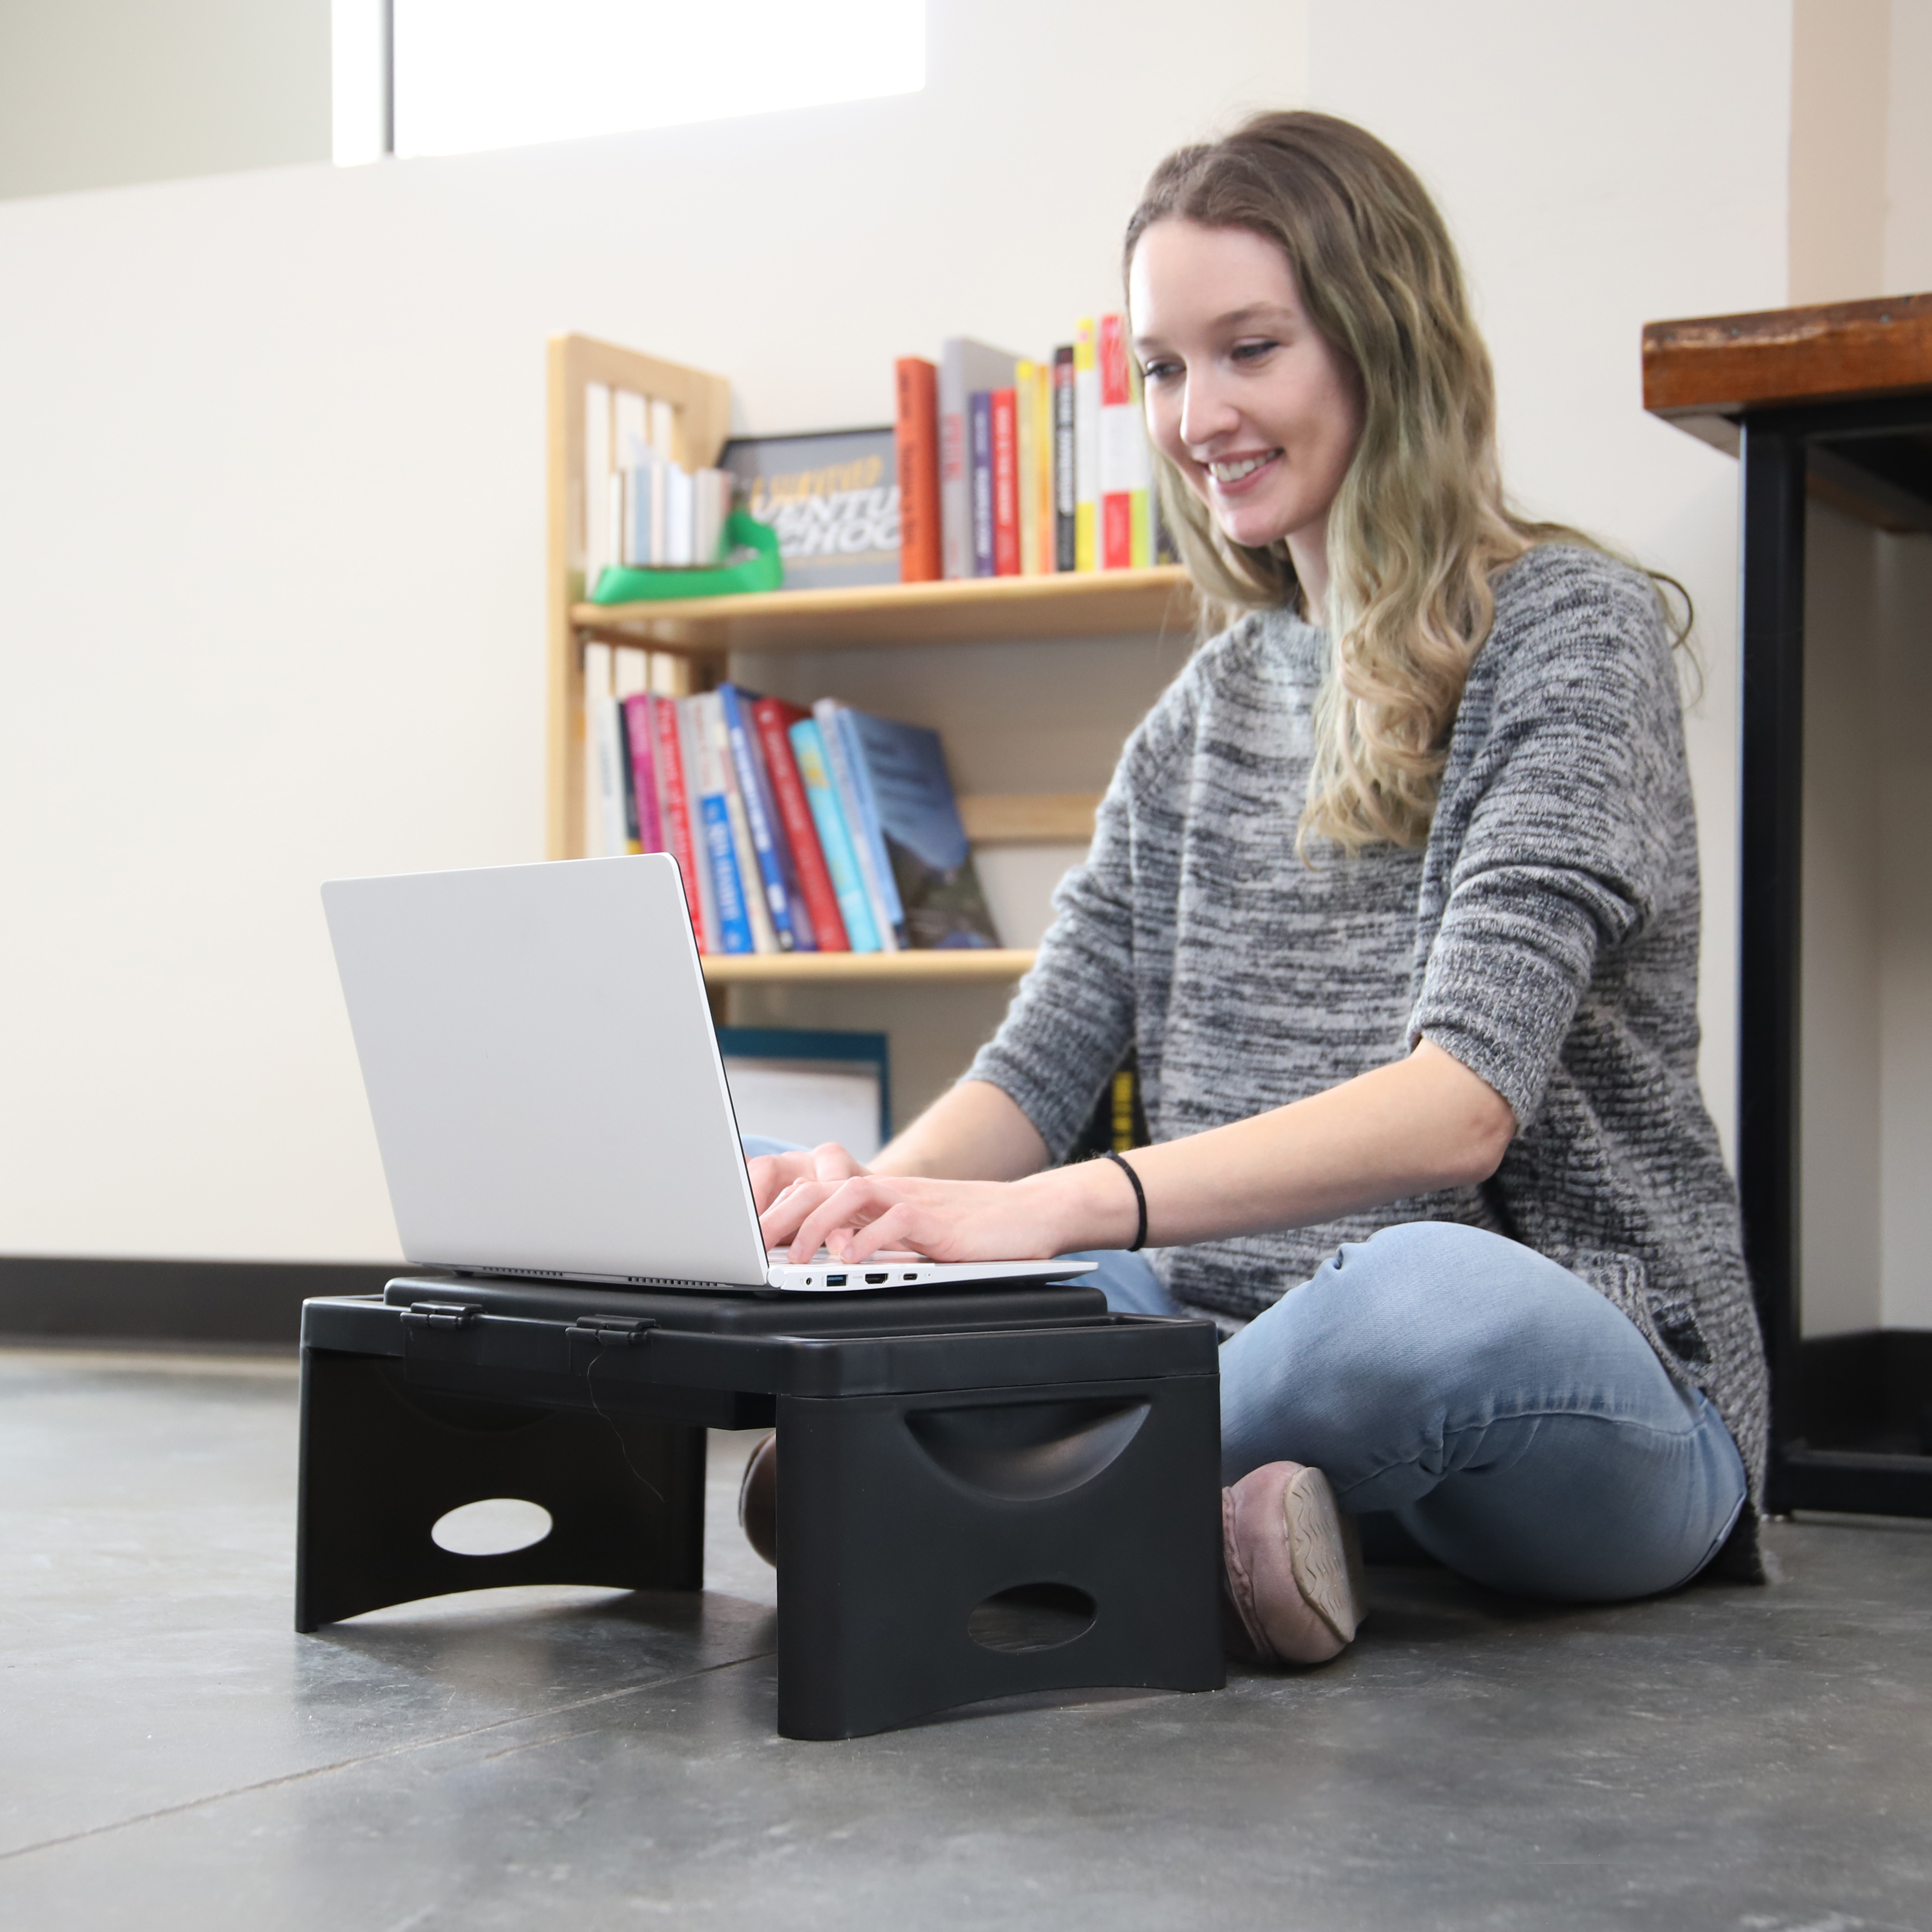 Foldable Lap Desk with Storage Pocket. Perfect use for Laptops, Travel, Breakfast in Bed, Gaming and Much More! Great for Kids and Teens! - image 3 of 6